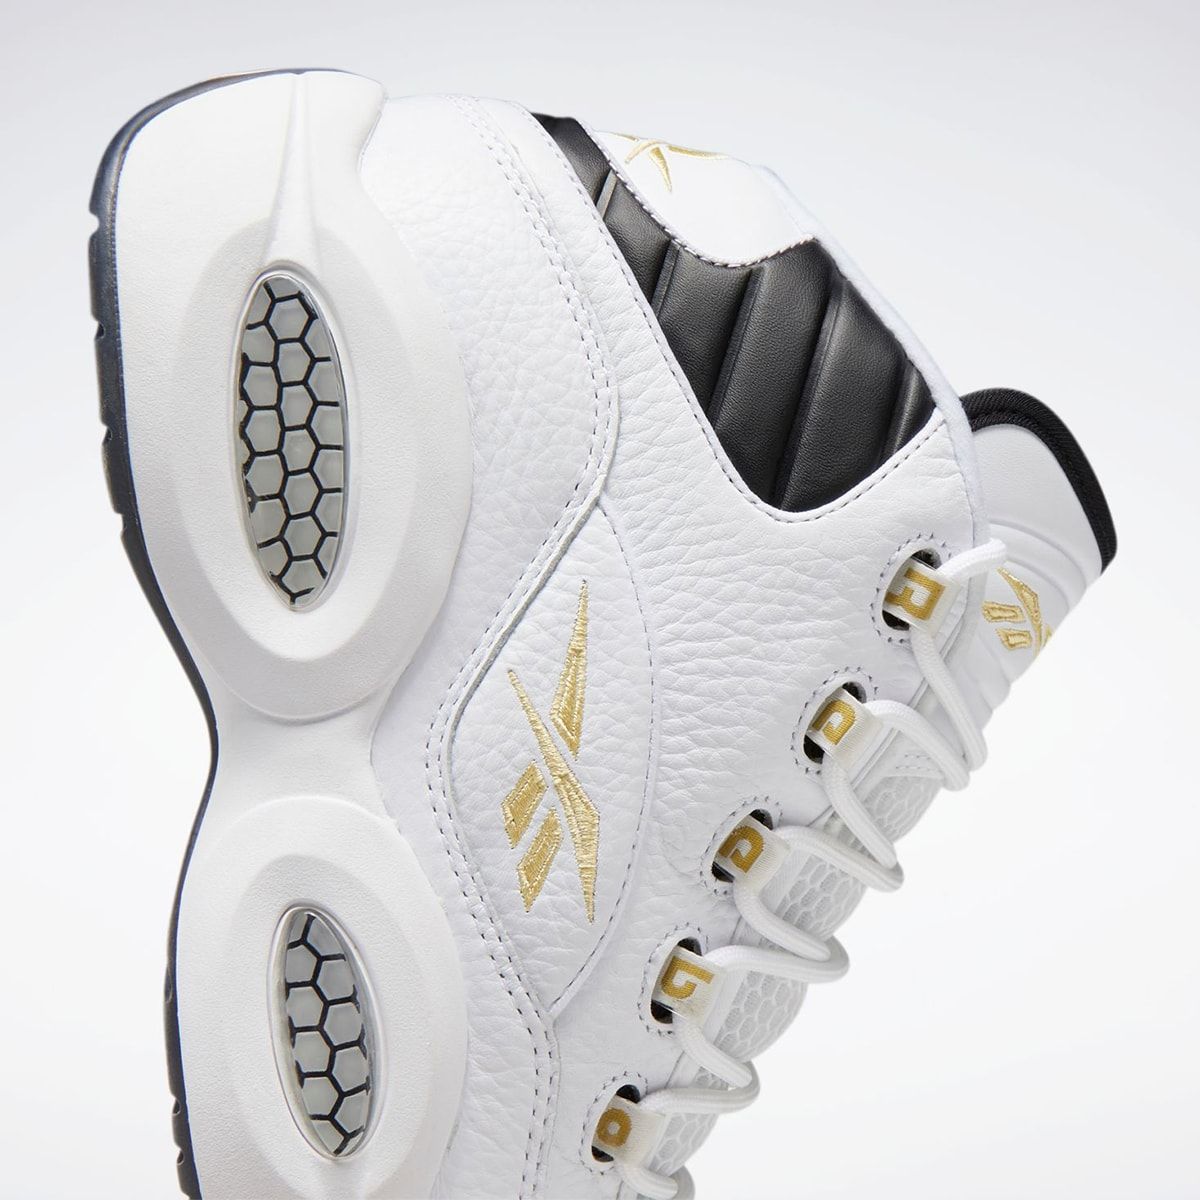 the new reebok questions